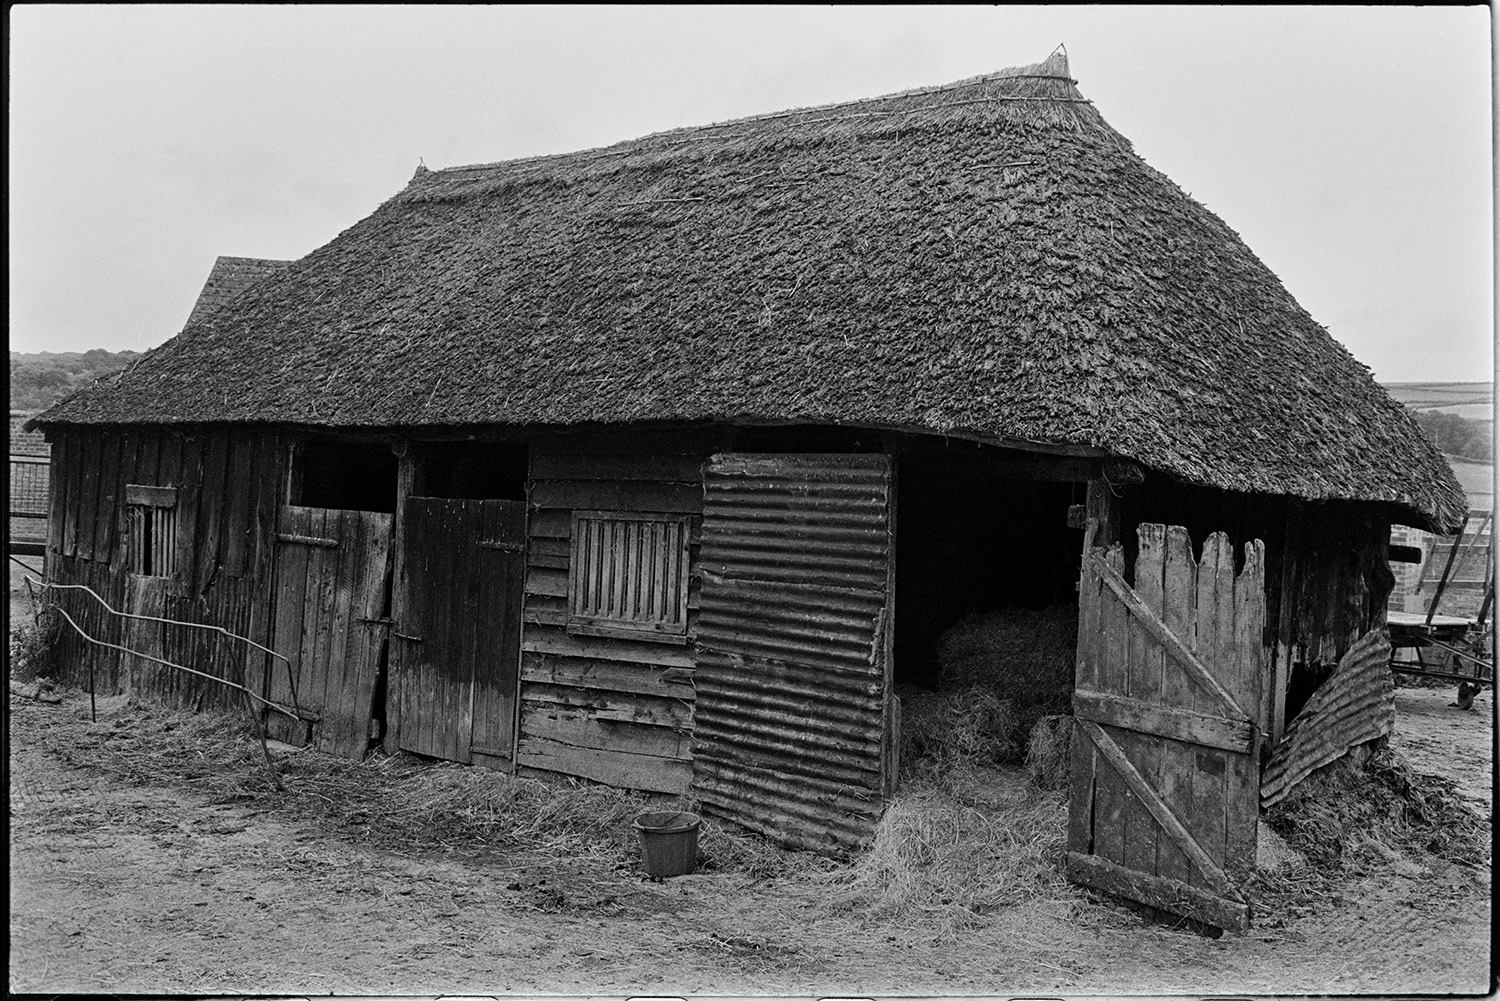 Wooden barn with thatched roof now demolished. 
[A wooden barn with a thatched roof at Leigh Farm, Chulmleigh. Hay bales can be seen through the open door of the barn.]